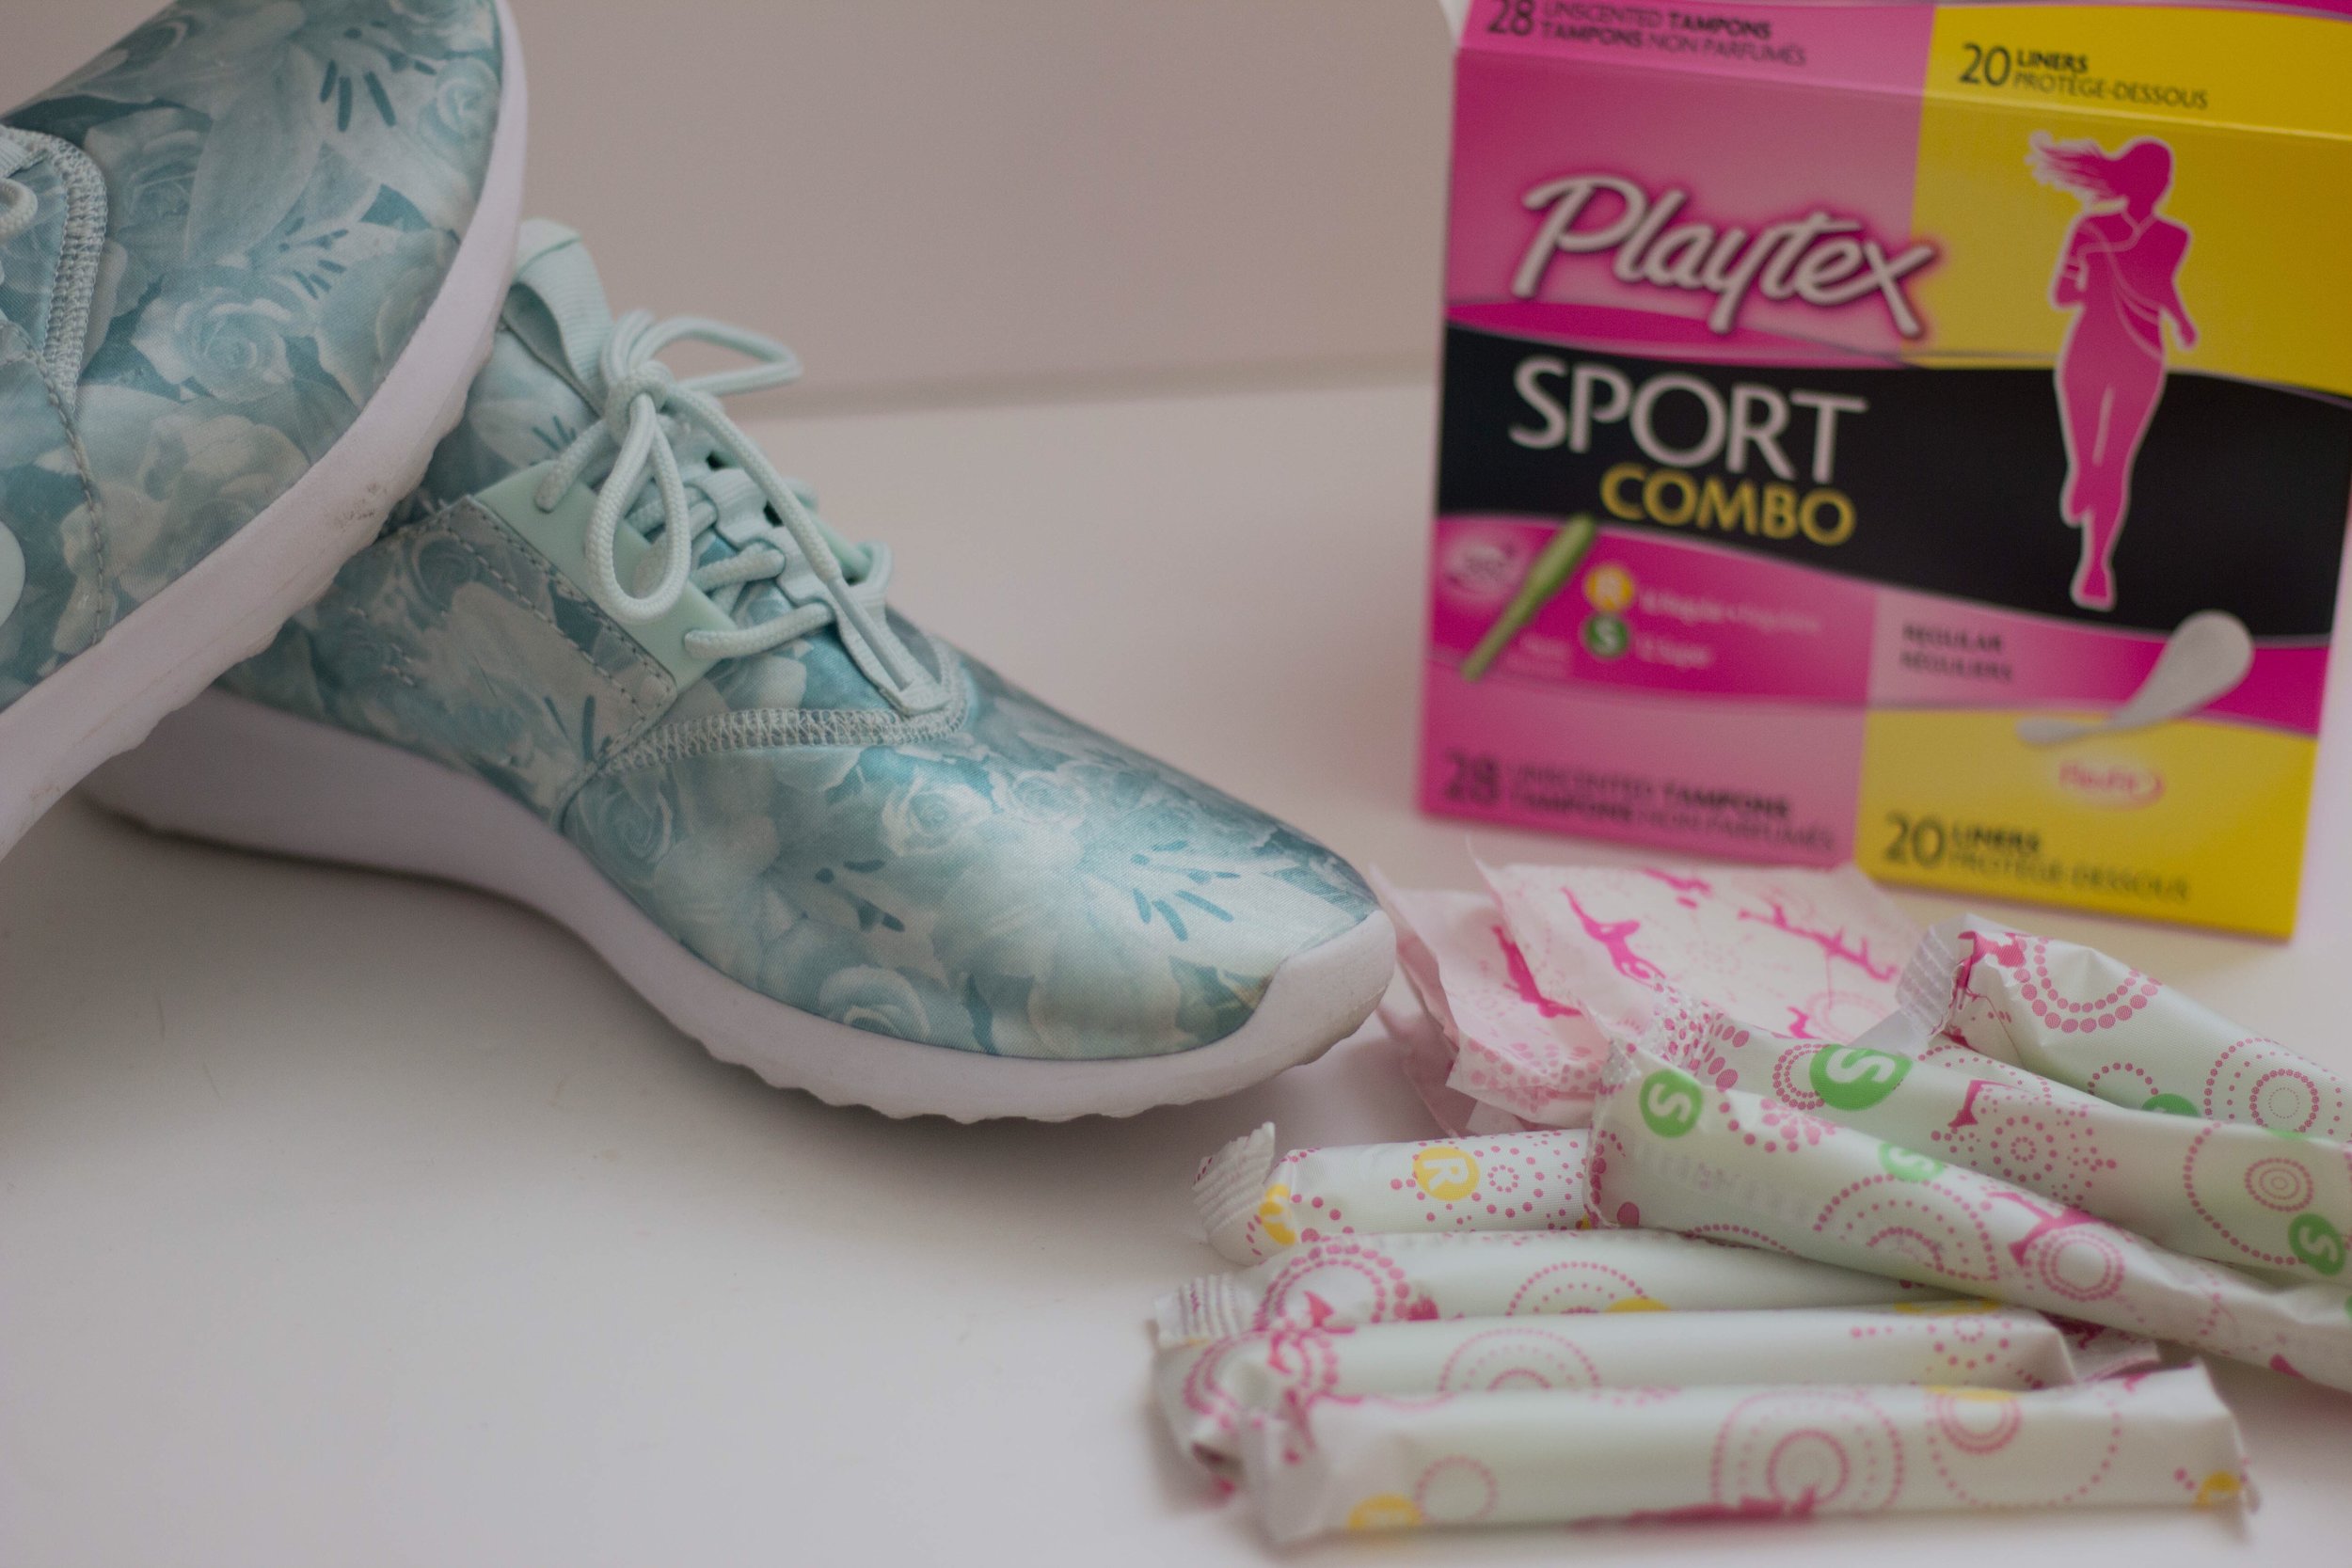 playtex sport compo pack, tampon, how to not let periods cramp your style, nike juvenate fiberglass tennis shoes